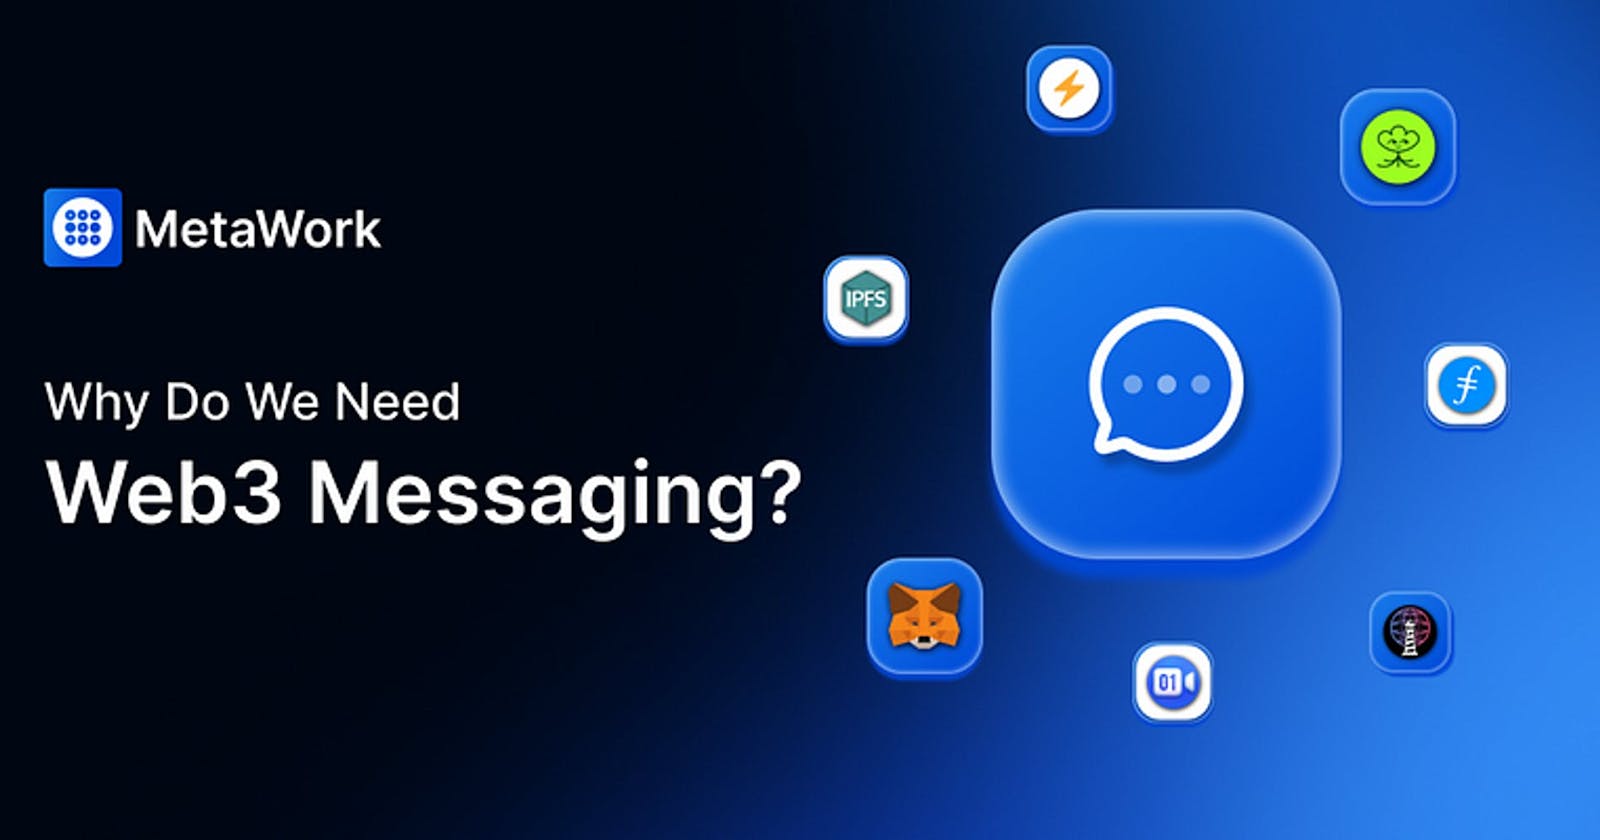 Why do we need a Web3 Messaging platform?